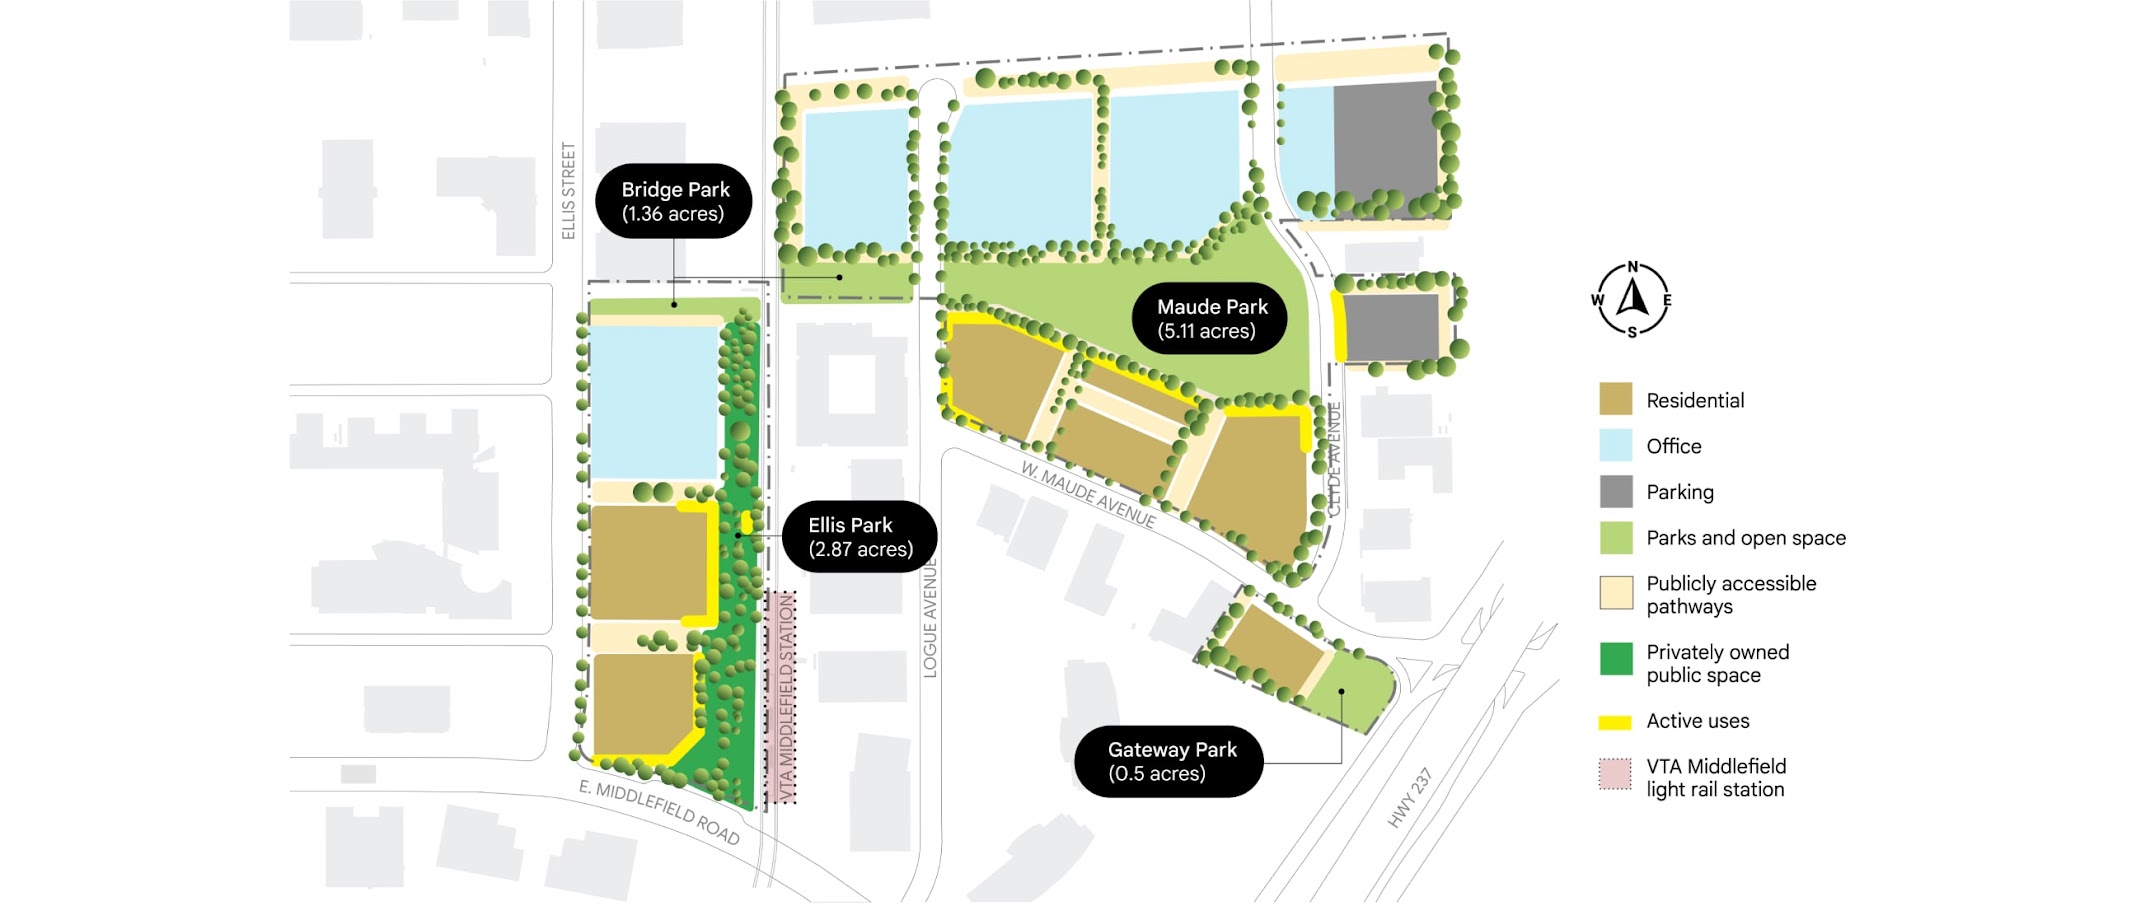 Middlefield Park Master Plan propose land use map